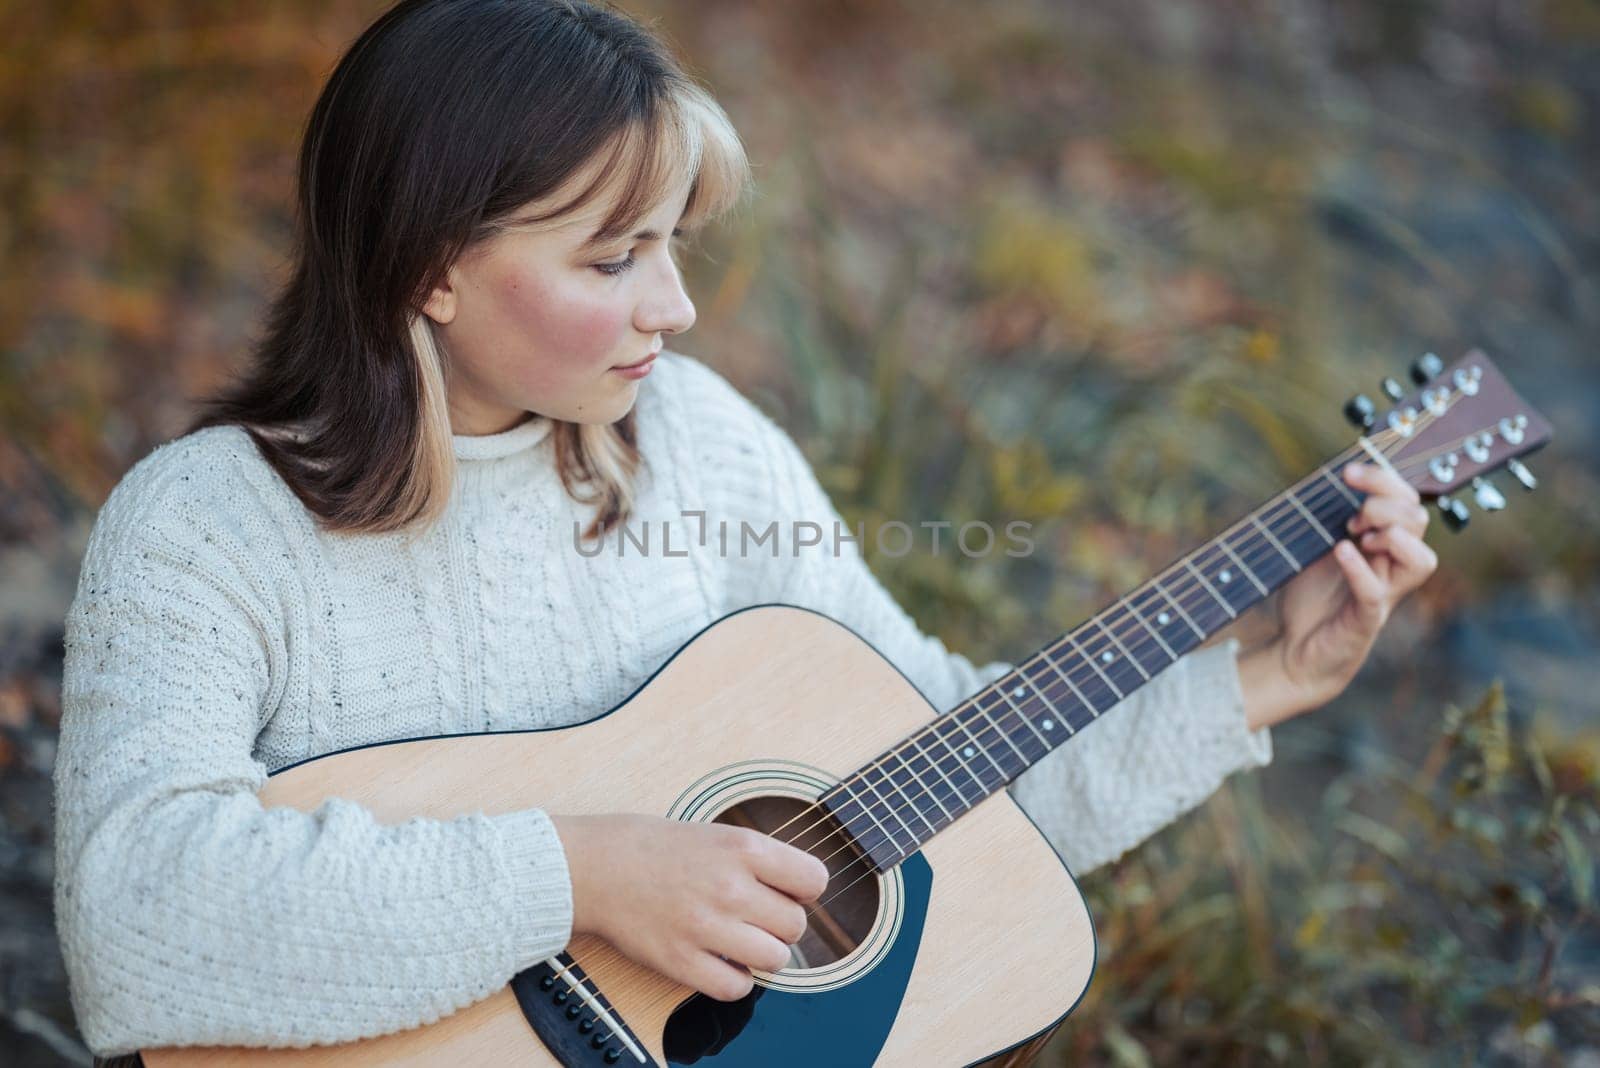 Portrait of a young girl playing the guitar outdoors, mastering her skills